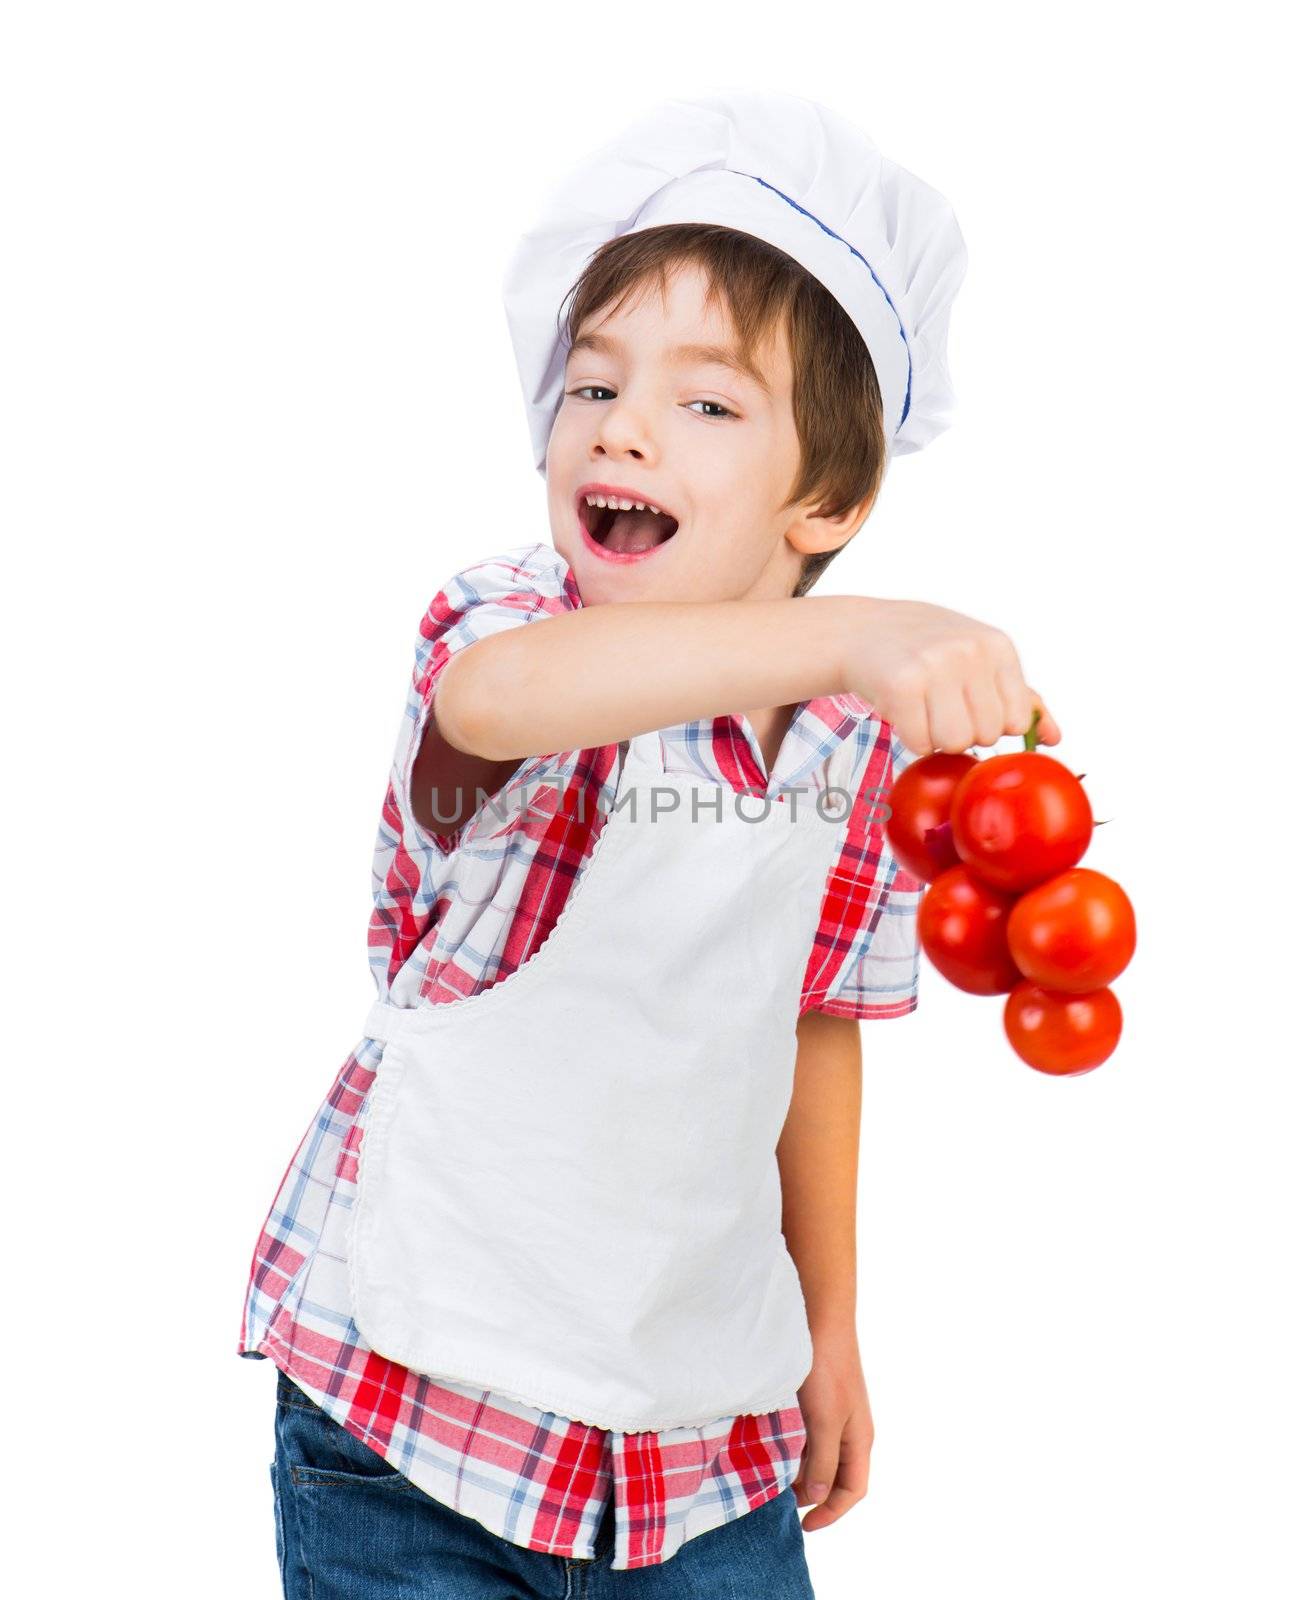 Smiling boy in dress Food Boy with tomatoes on white background